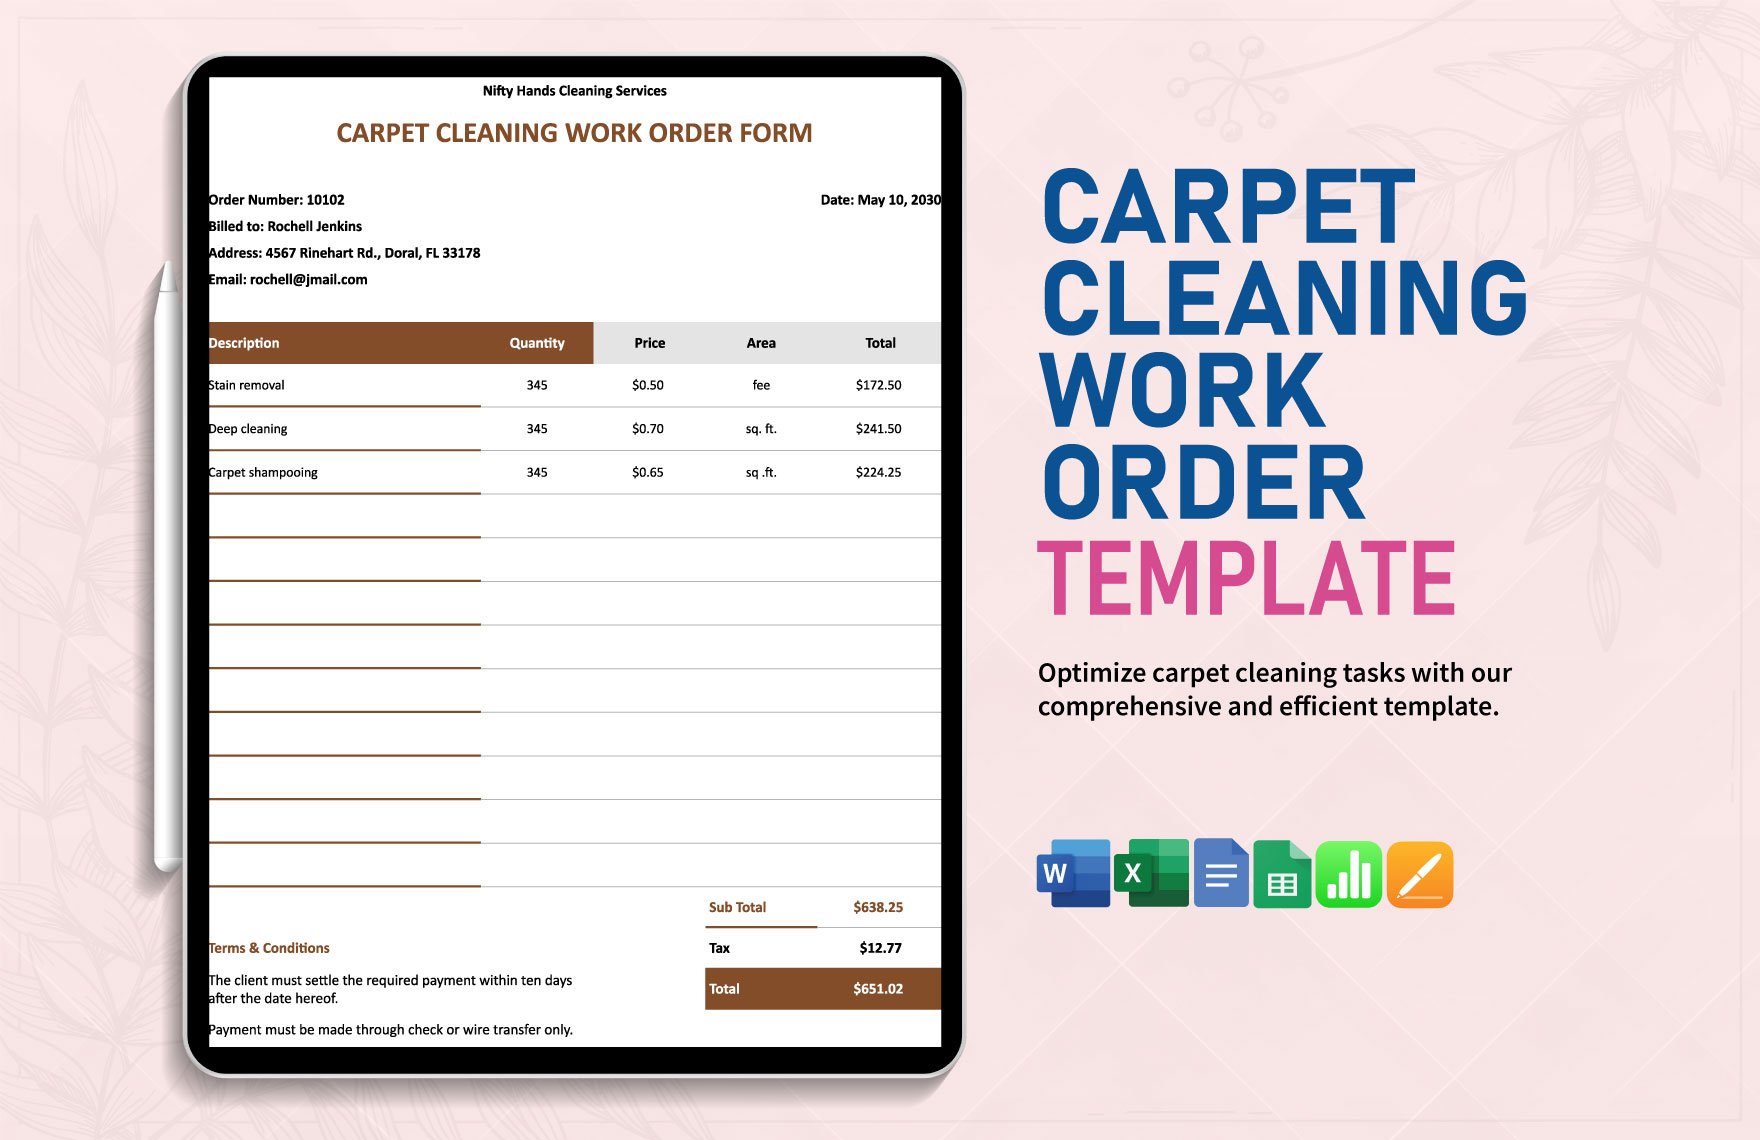 Carpet Cleaning Work Order Template